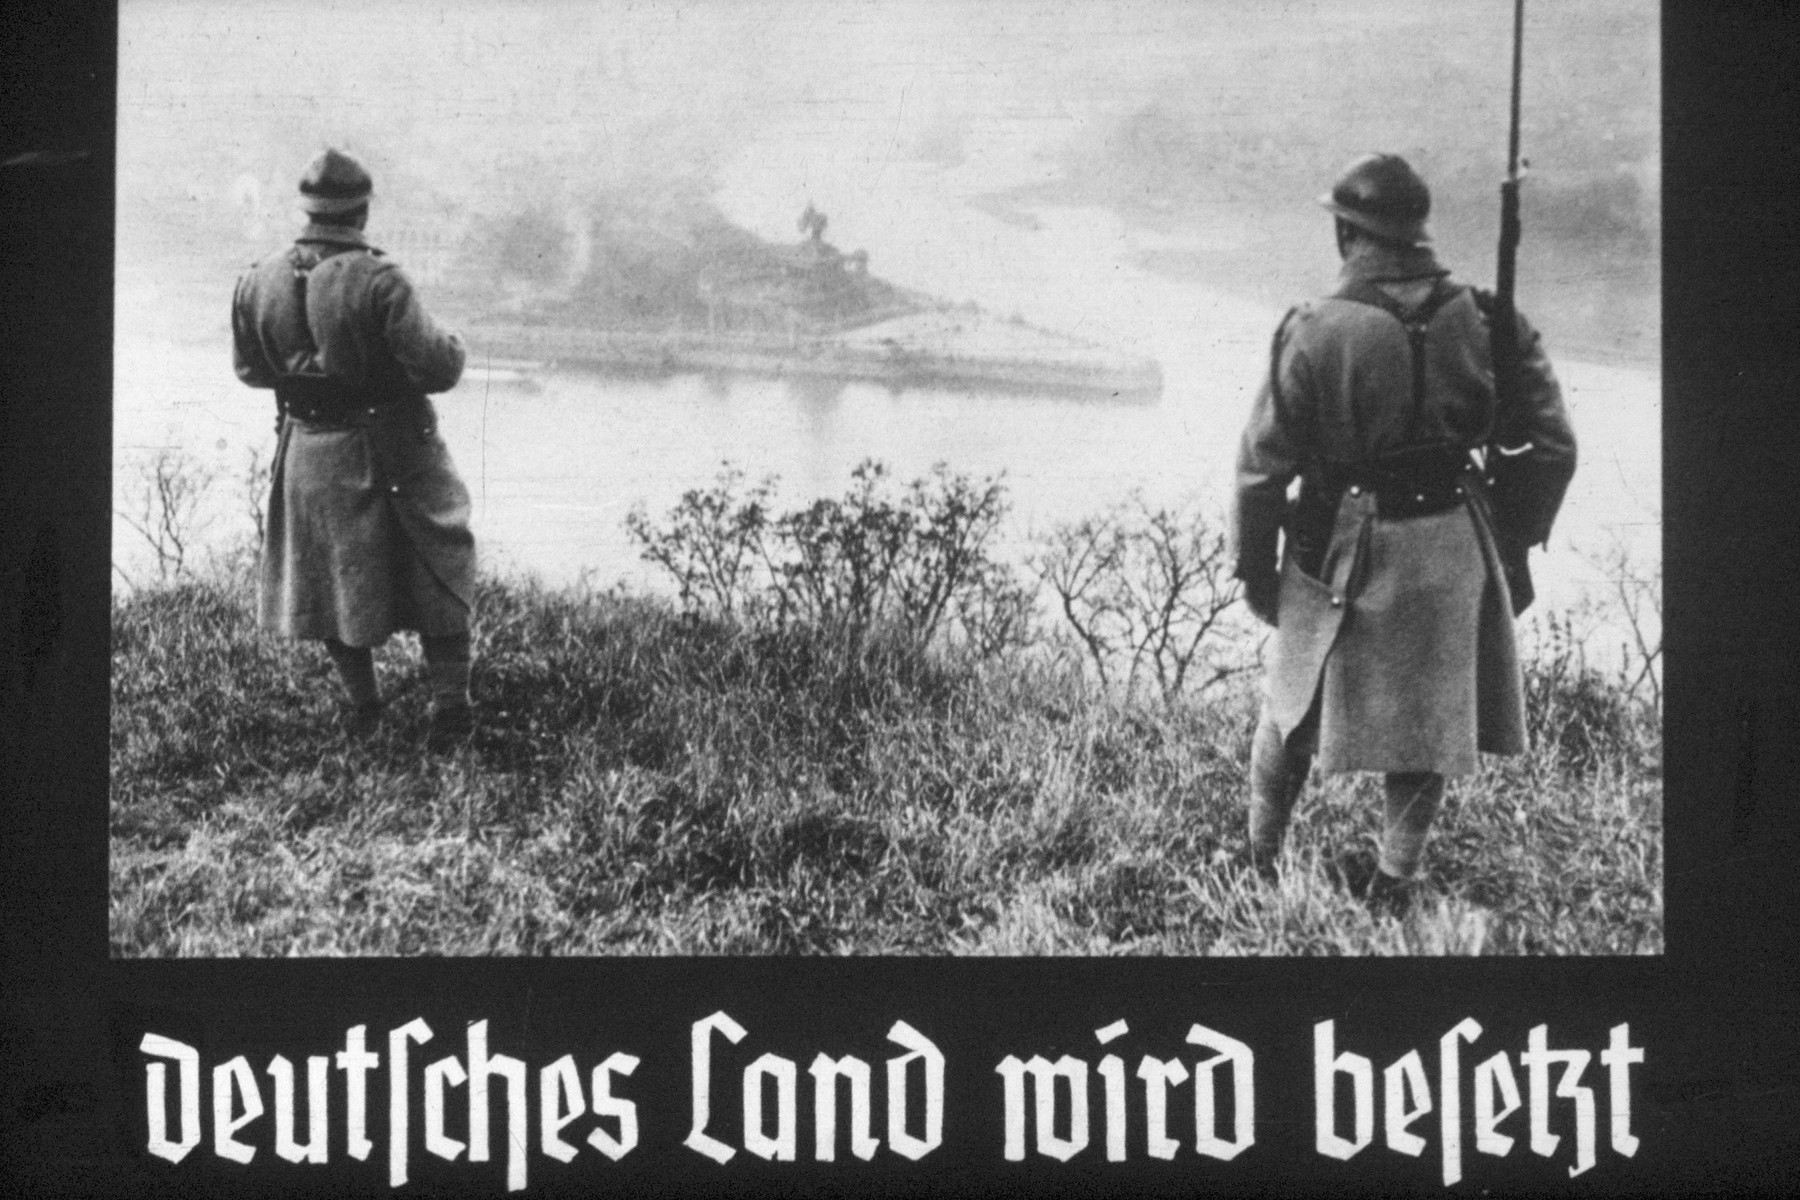 29th slide from a Hitler Youth slideshow about the aftermath of WWI, Versailles, how it was overcome and the rise of Nazism.

Deutsches Land wird besetzt.
//
German land is occupied.